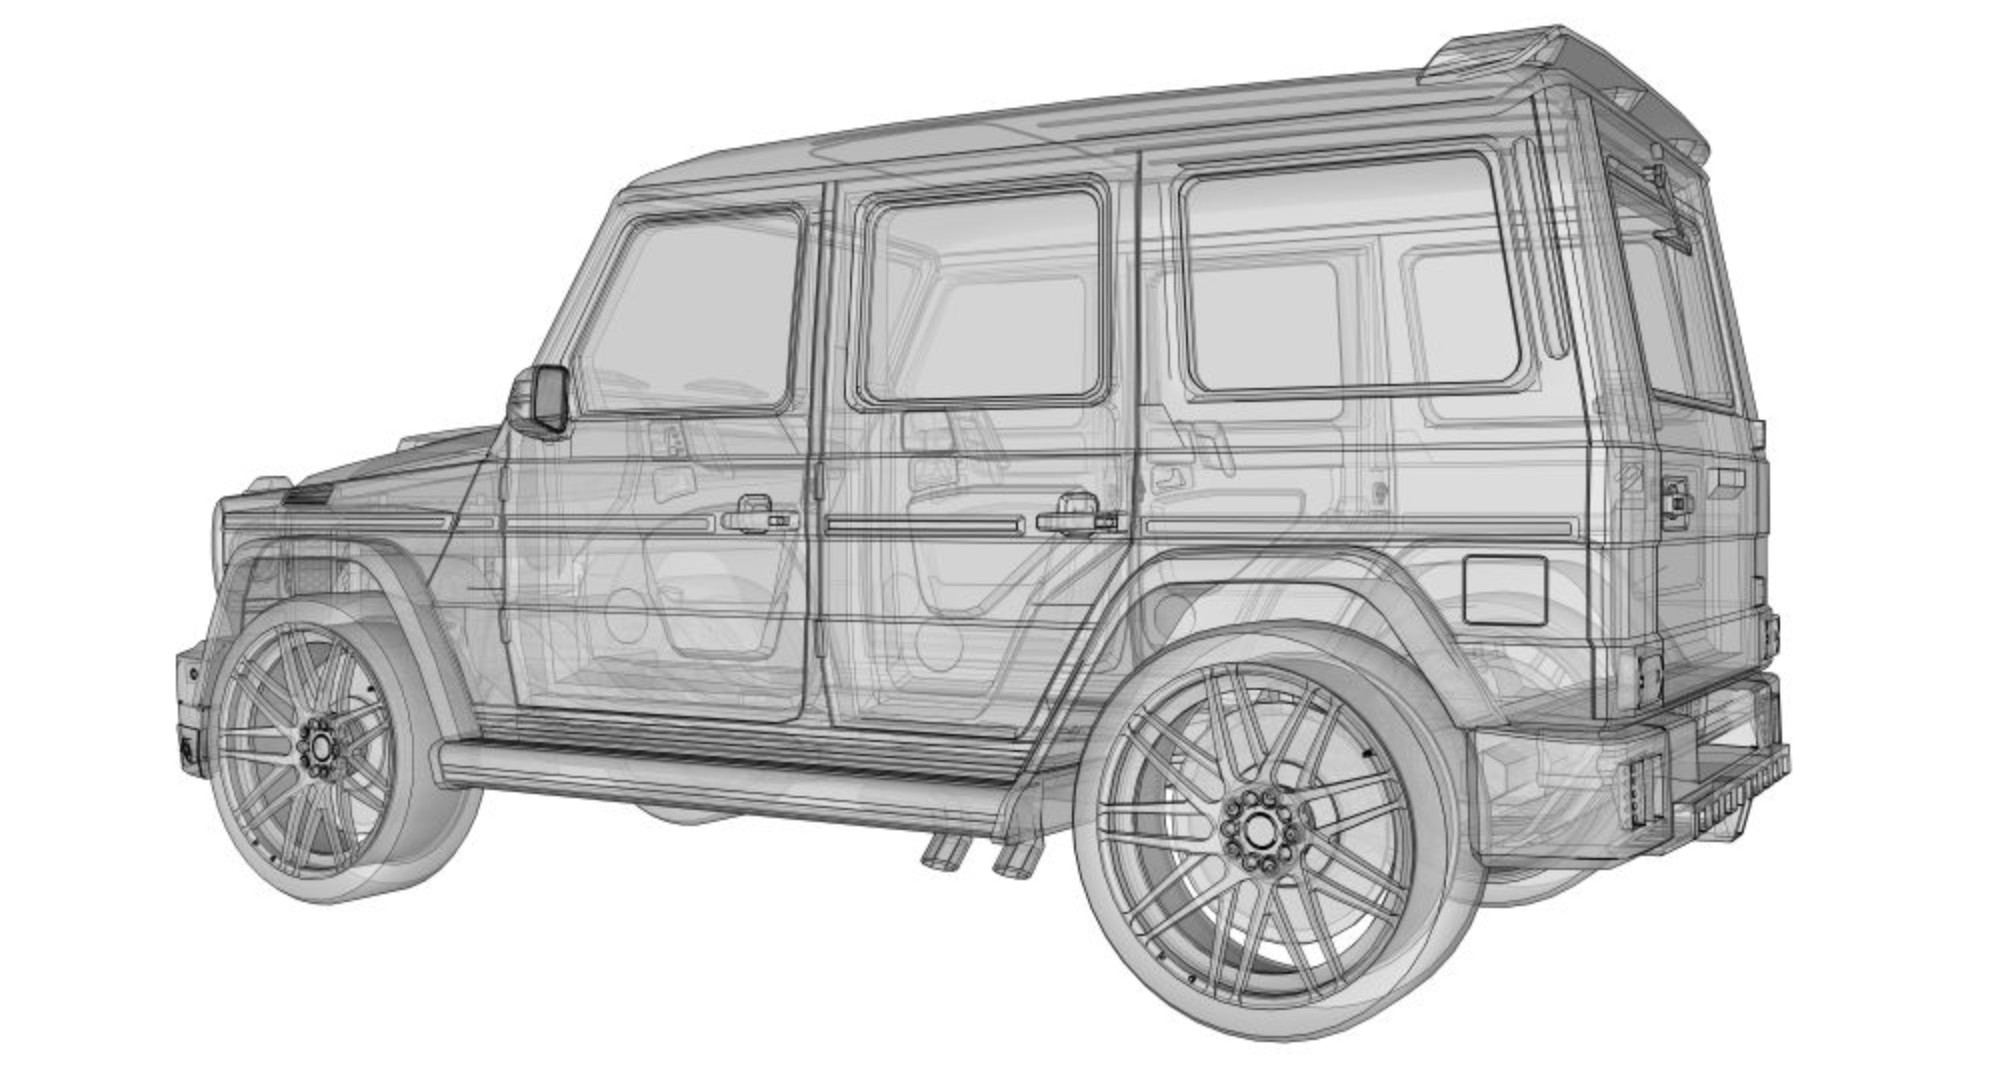 Detroit Engineered Products (DEP)'s Full Vehicle Parameterization Technology reduces SUV weight, to making it fuel efficient